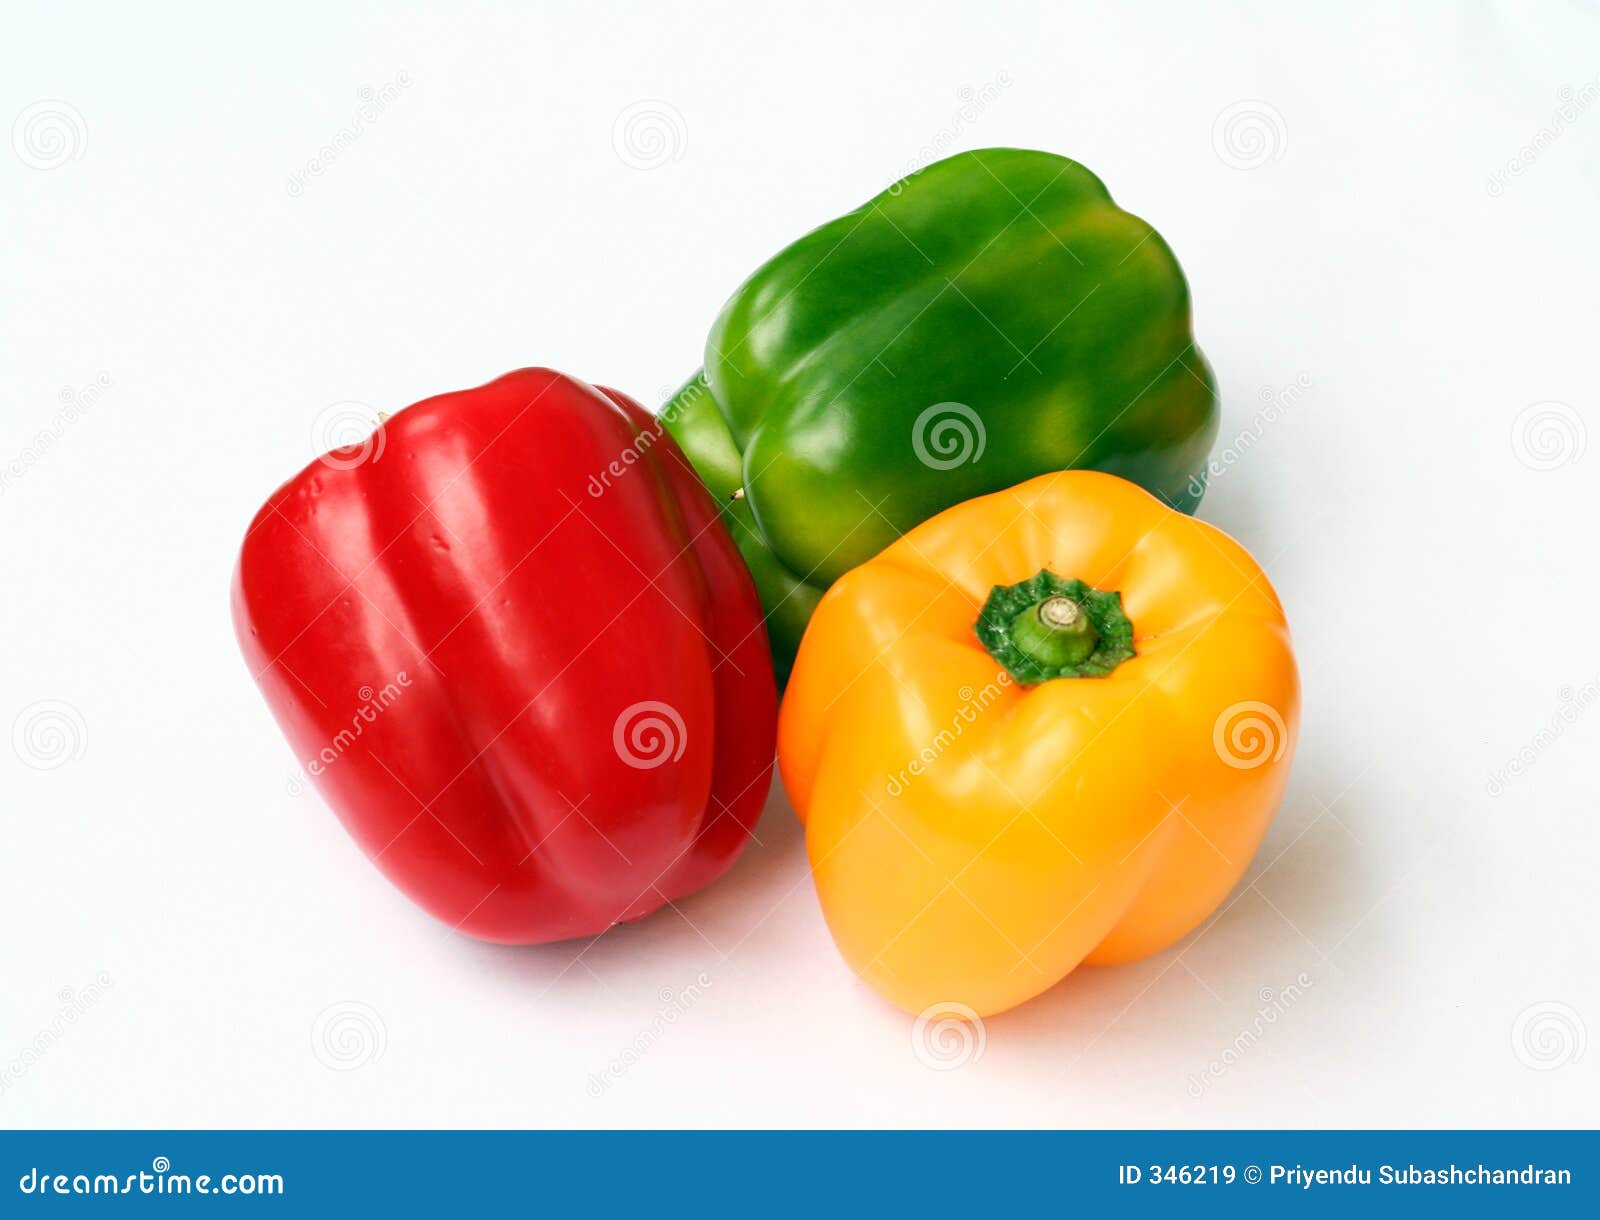 The Many Colors Of Bell Peppers  A Moment of Science - Indiana Public Media